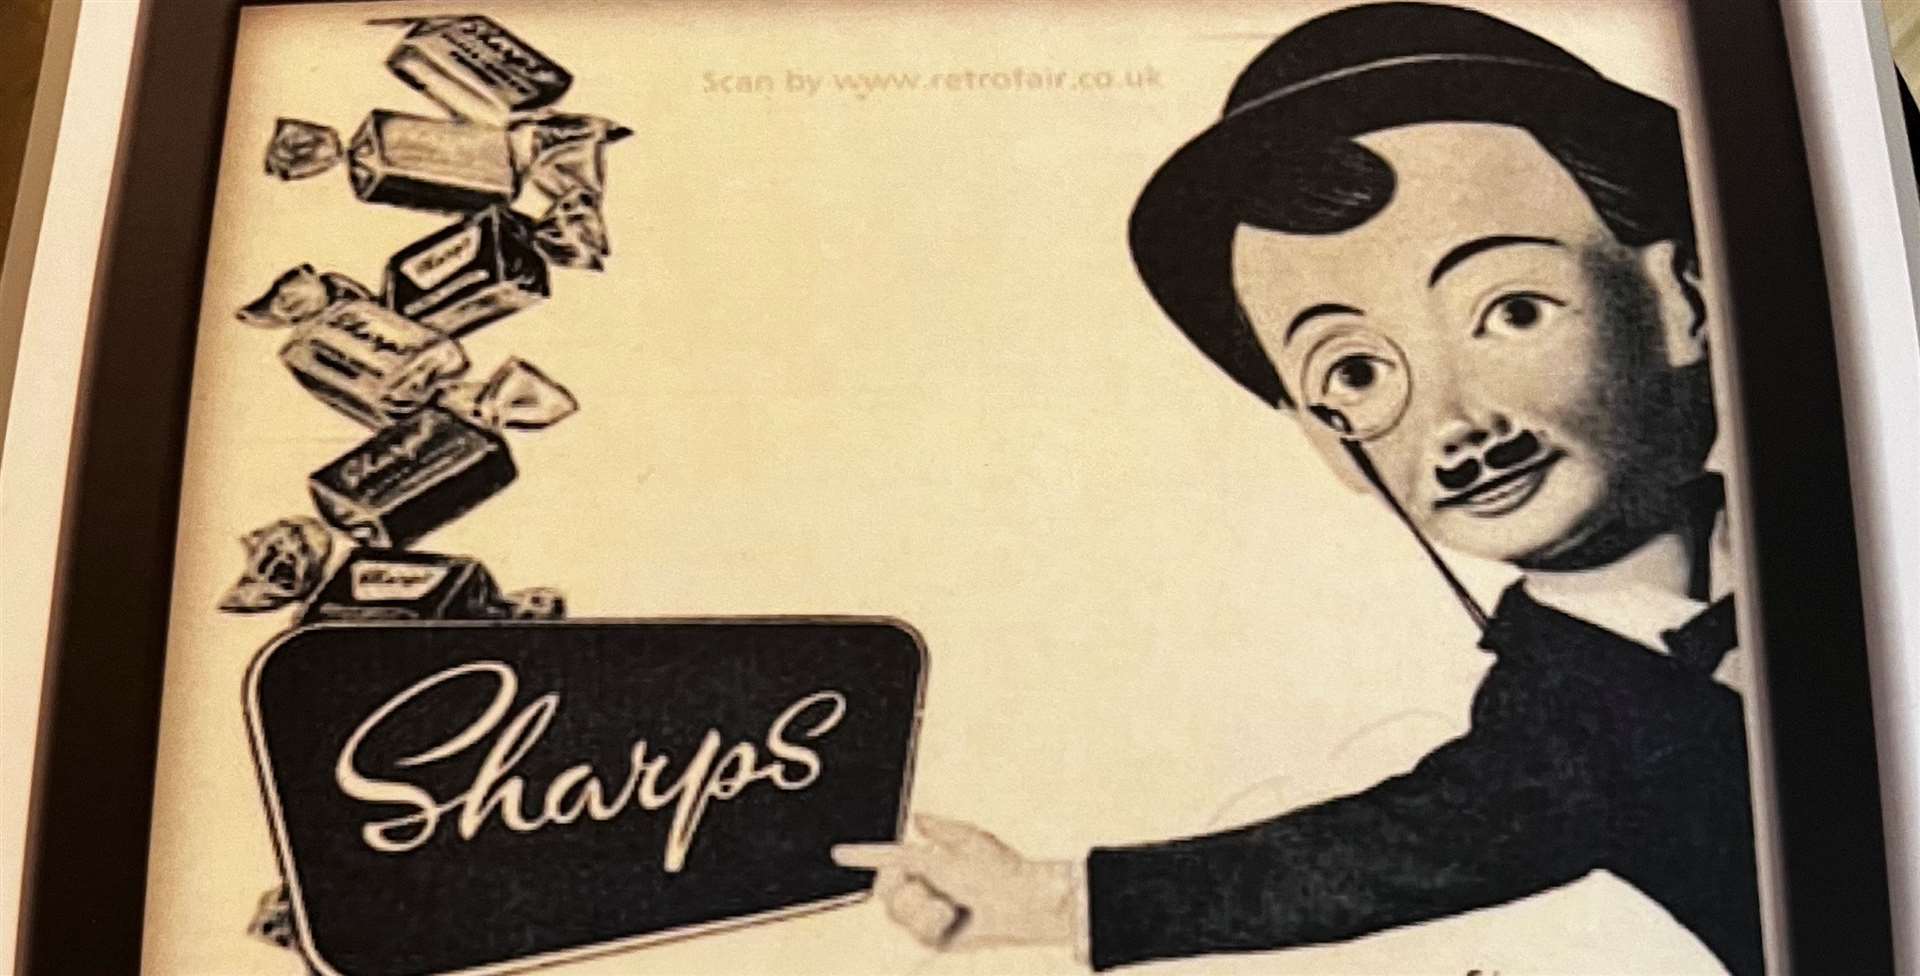 Sir Creamy Nut was Trebor Sharps’ famous character